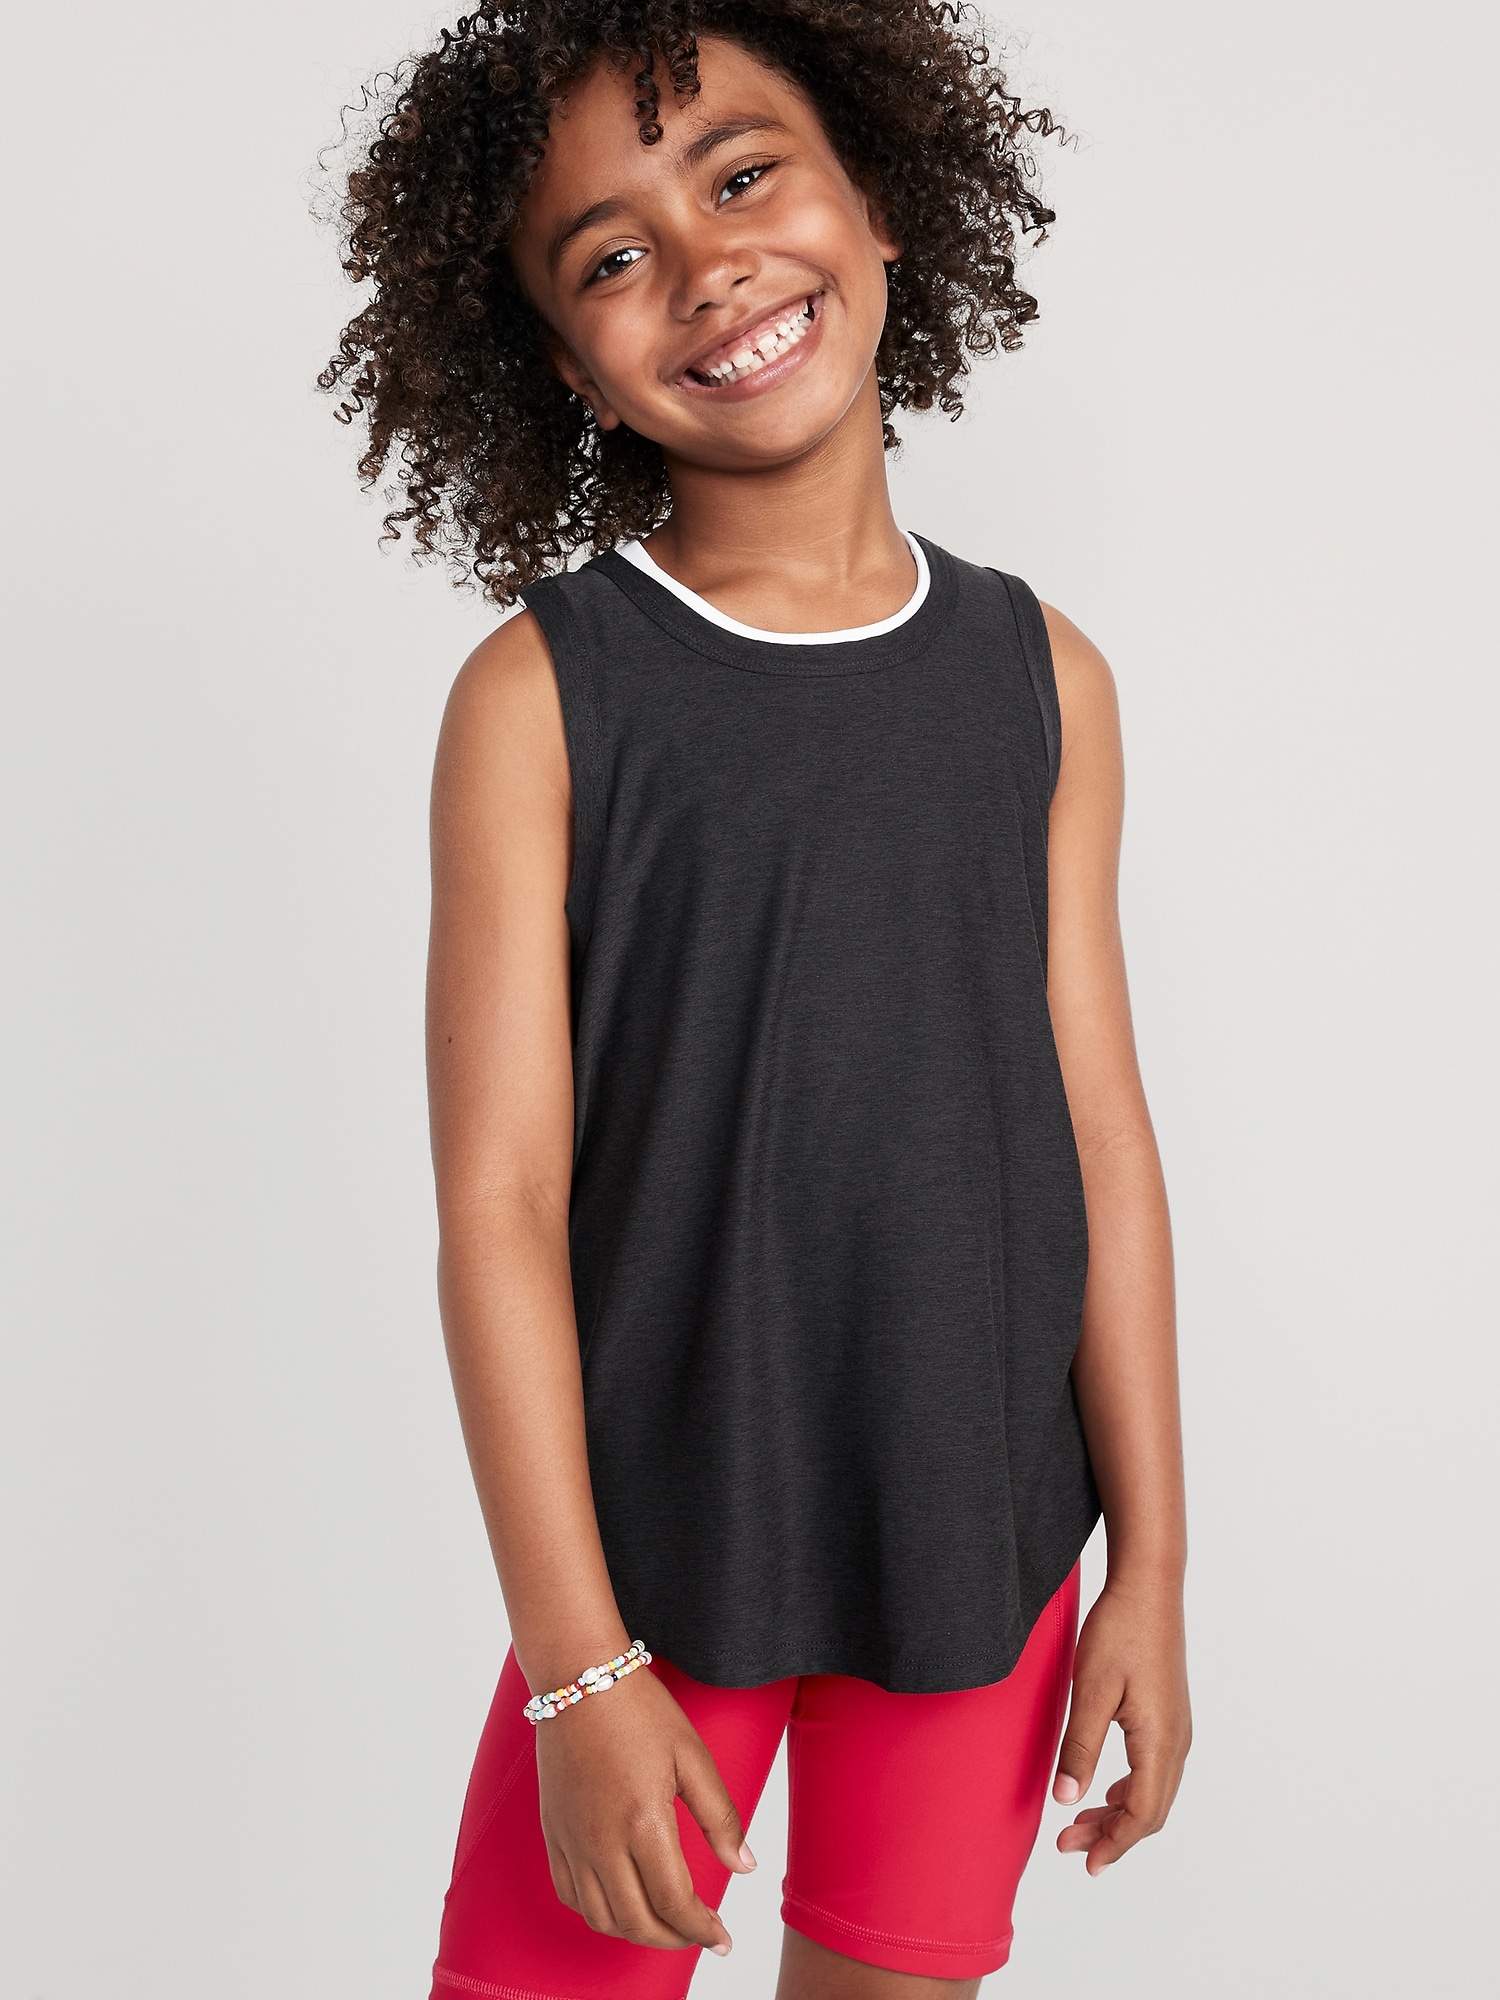 Old Navy Cloud 94 Soft Go-Dry Cool Tunic Tank Top for Girls black. 1